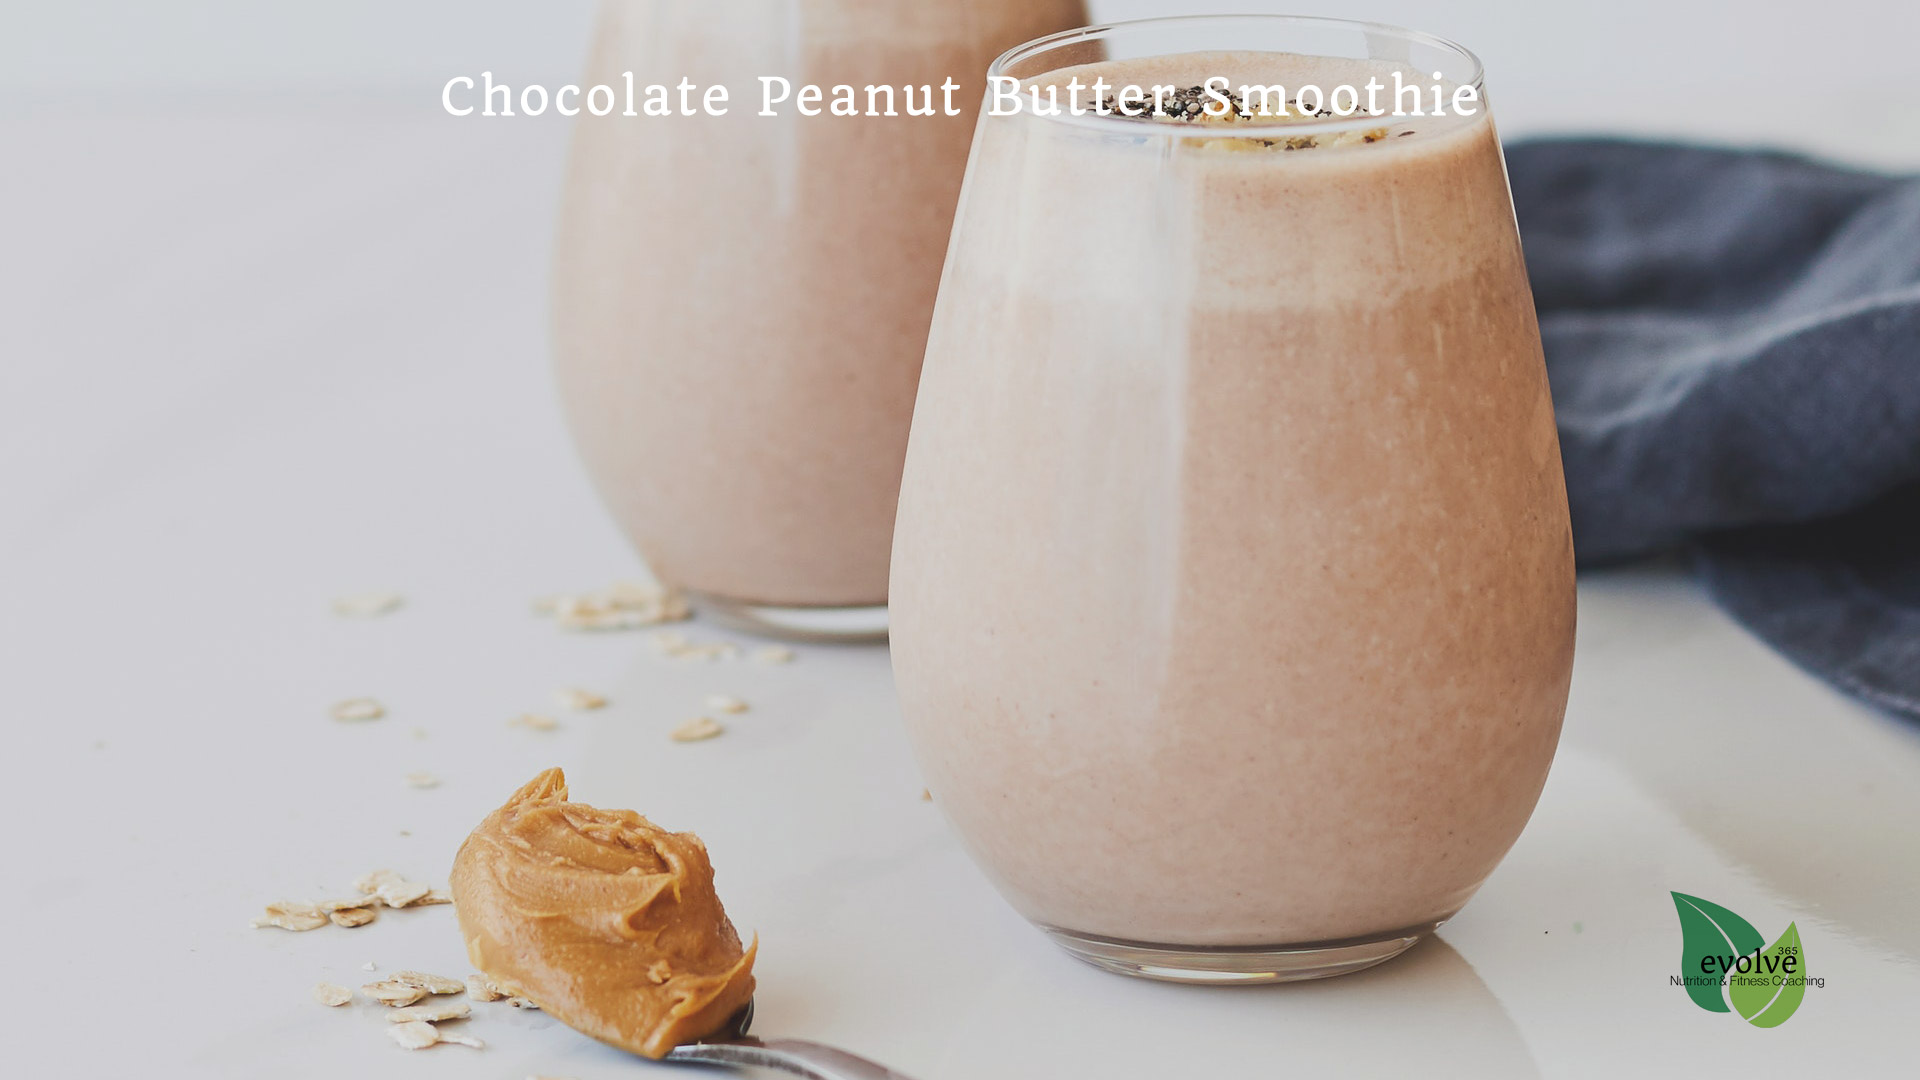 Chocolate Peanut Butter Smoothie Featured Edited